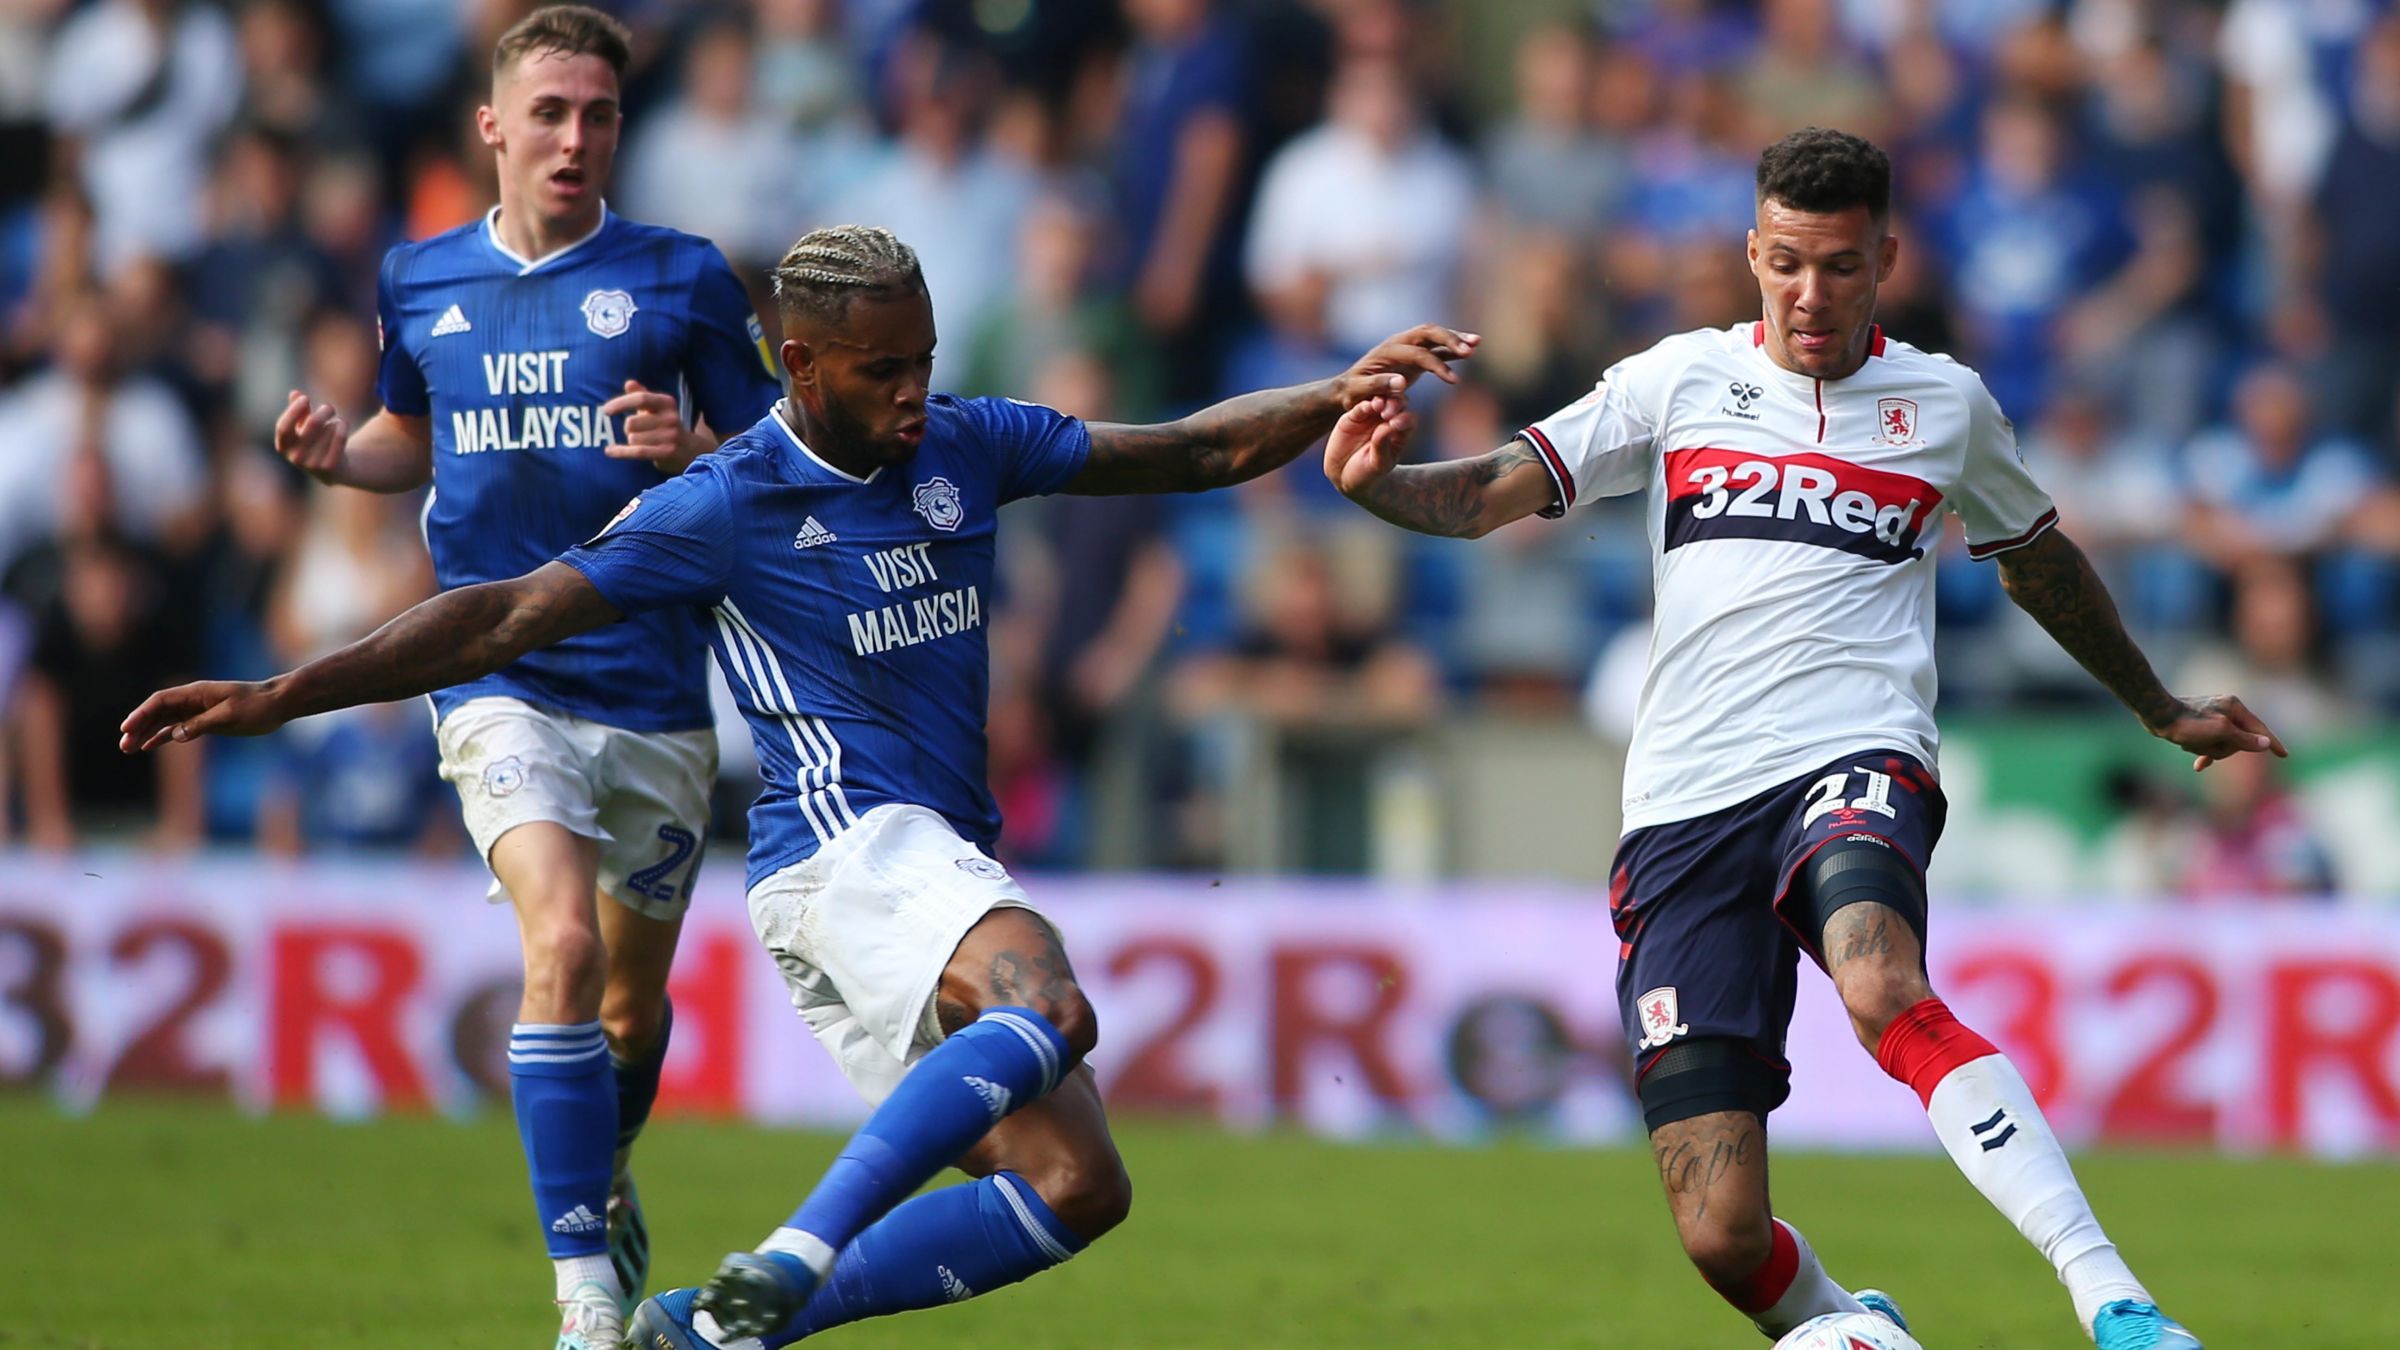 Middlesbrough vs Cardiff Predictions, Betting Tips & Odds │27 APRIL, 2022